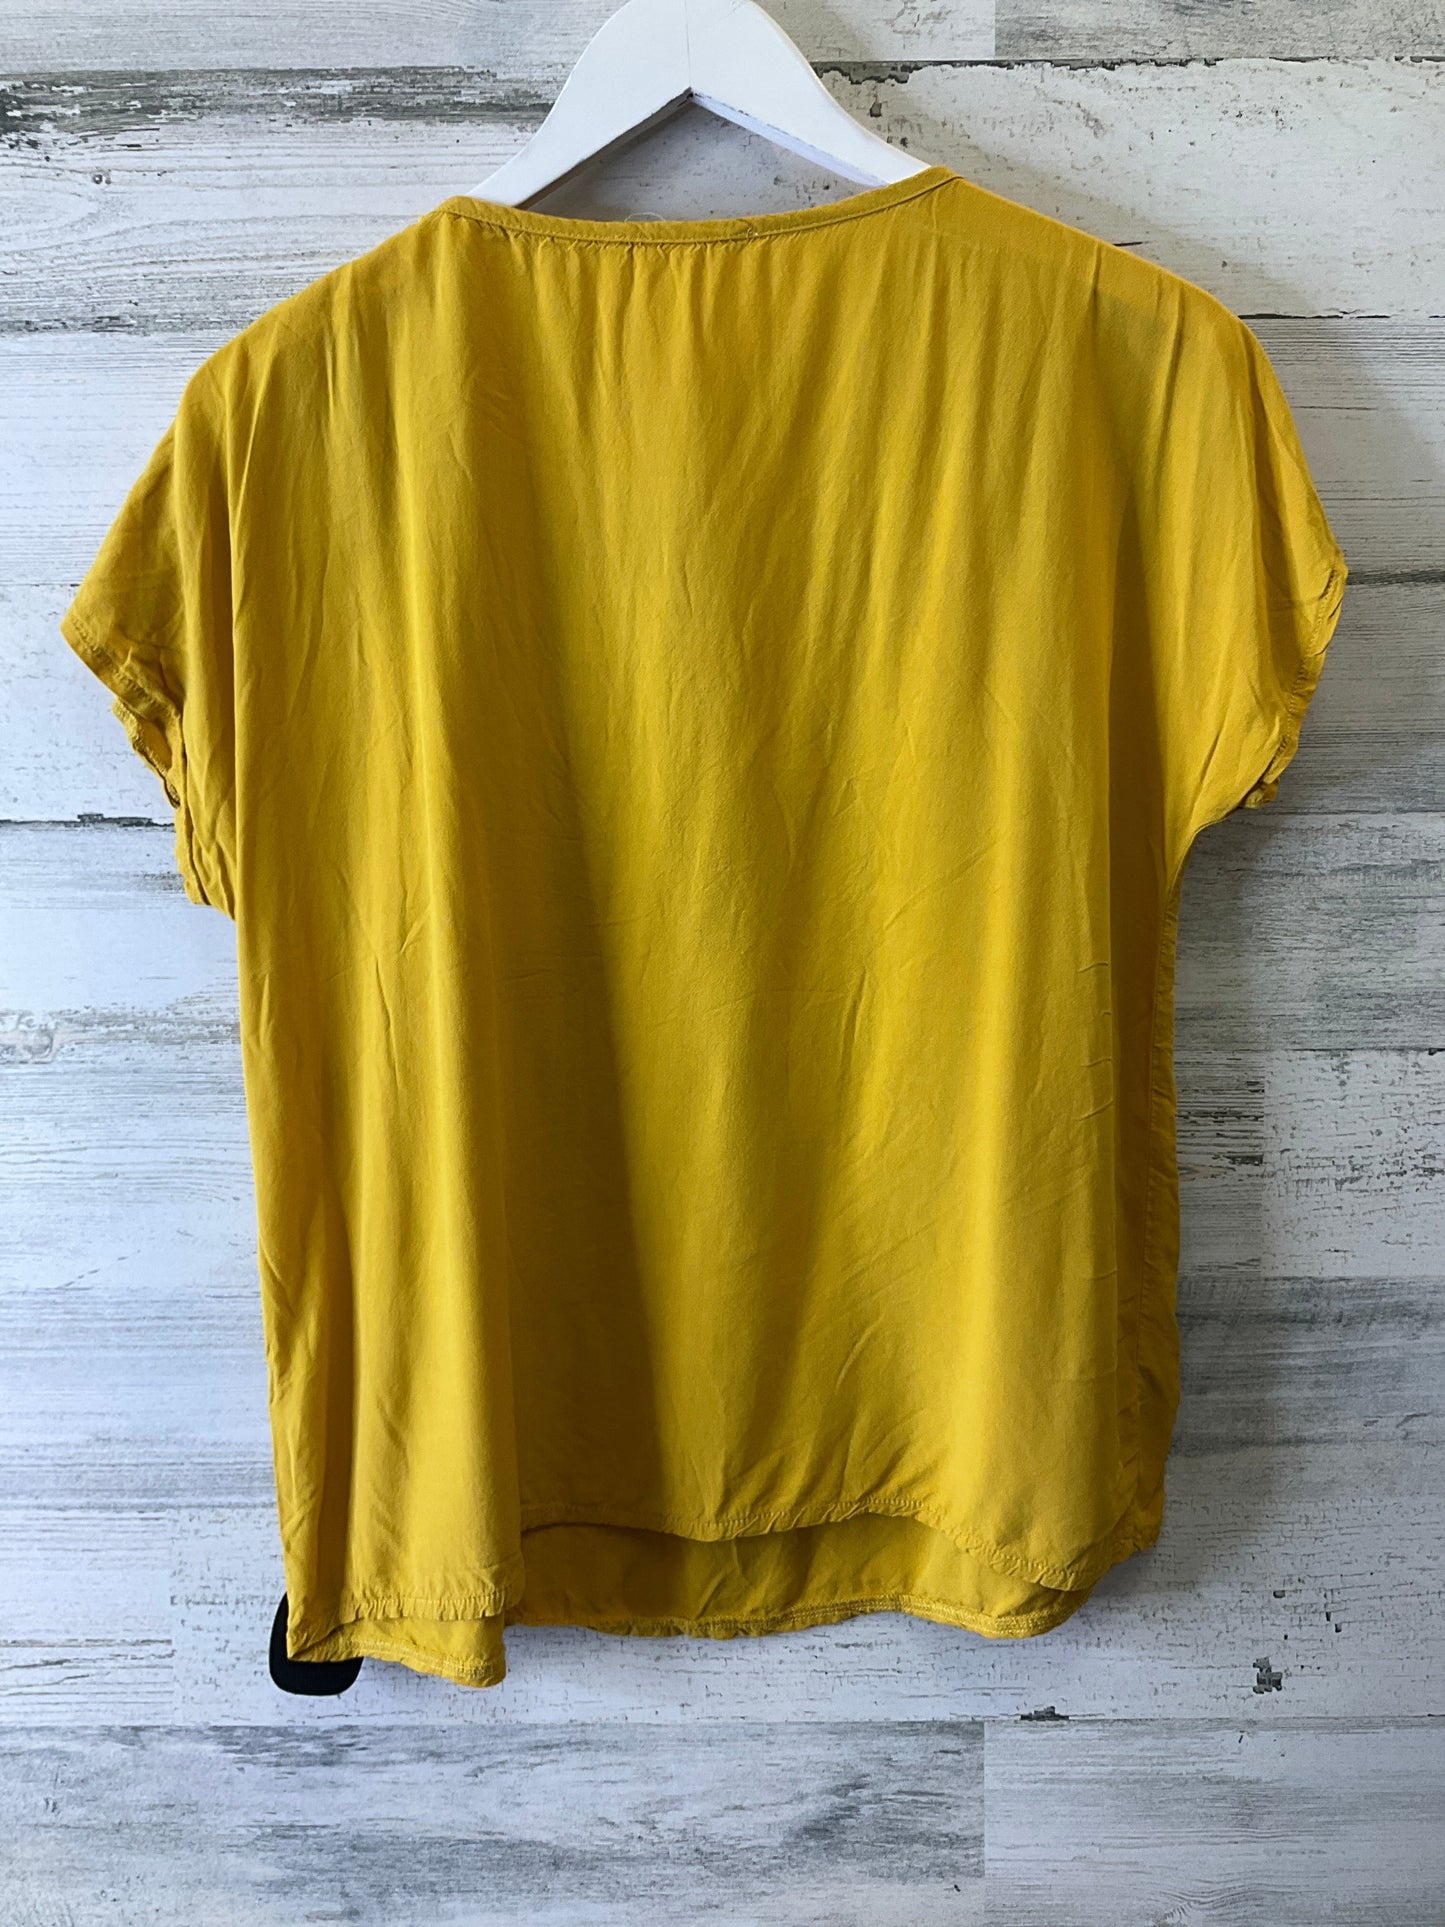 Yellow Top Short Sleeve Solitaire, Size S